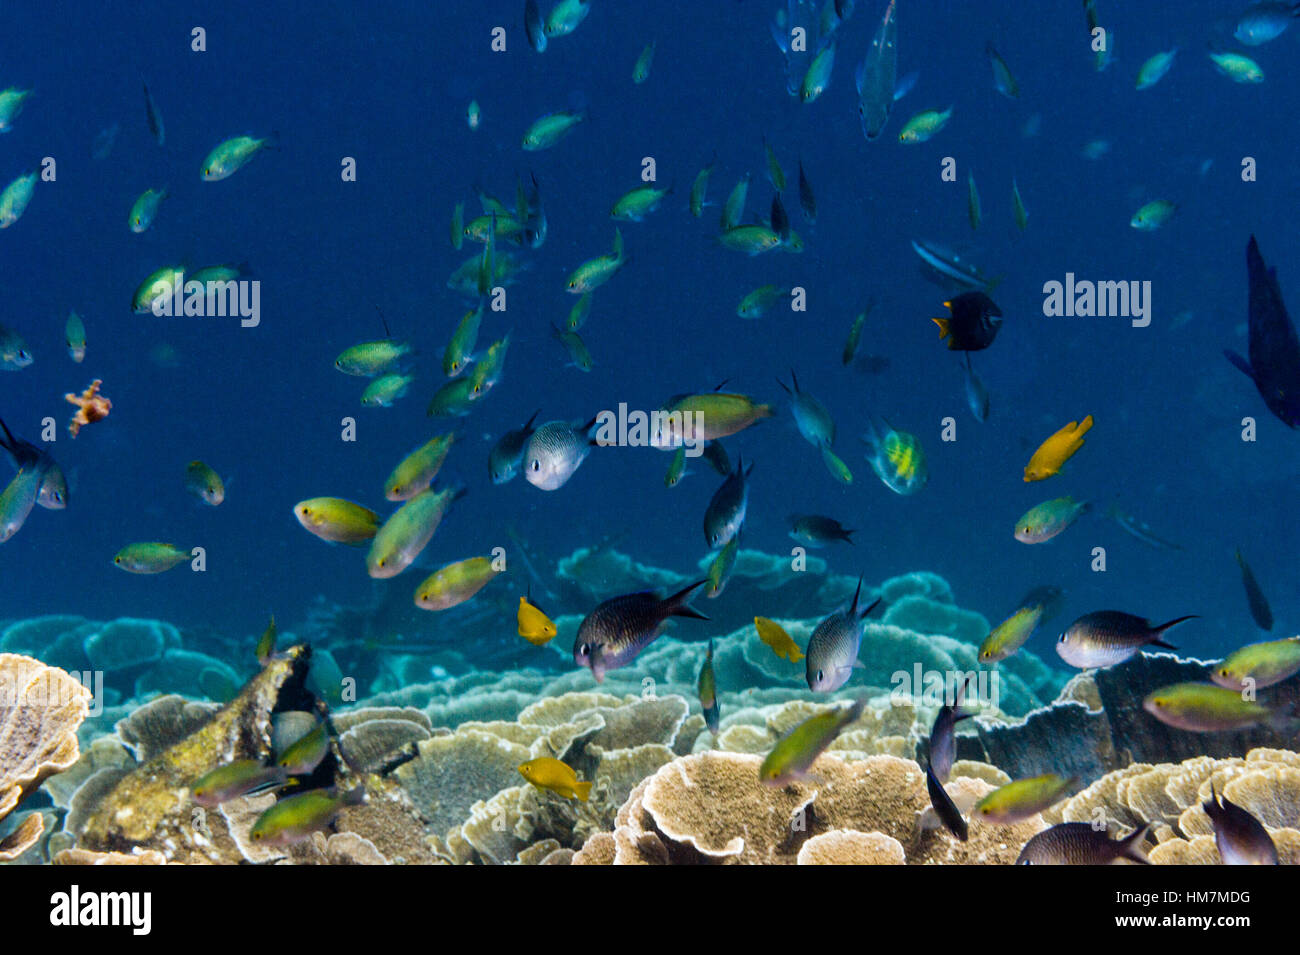 A shoal of assorted Chromodoris damsel fish swimming above a reef. Stock Photo